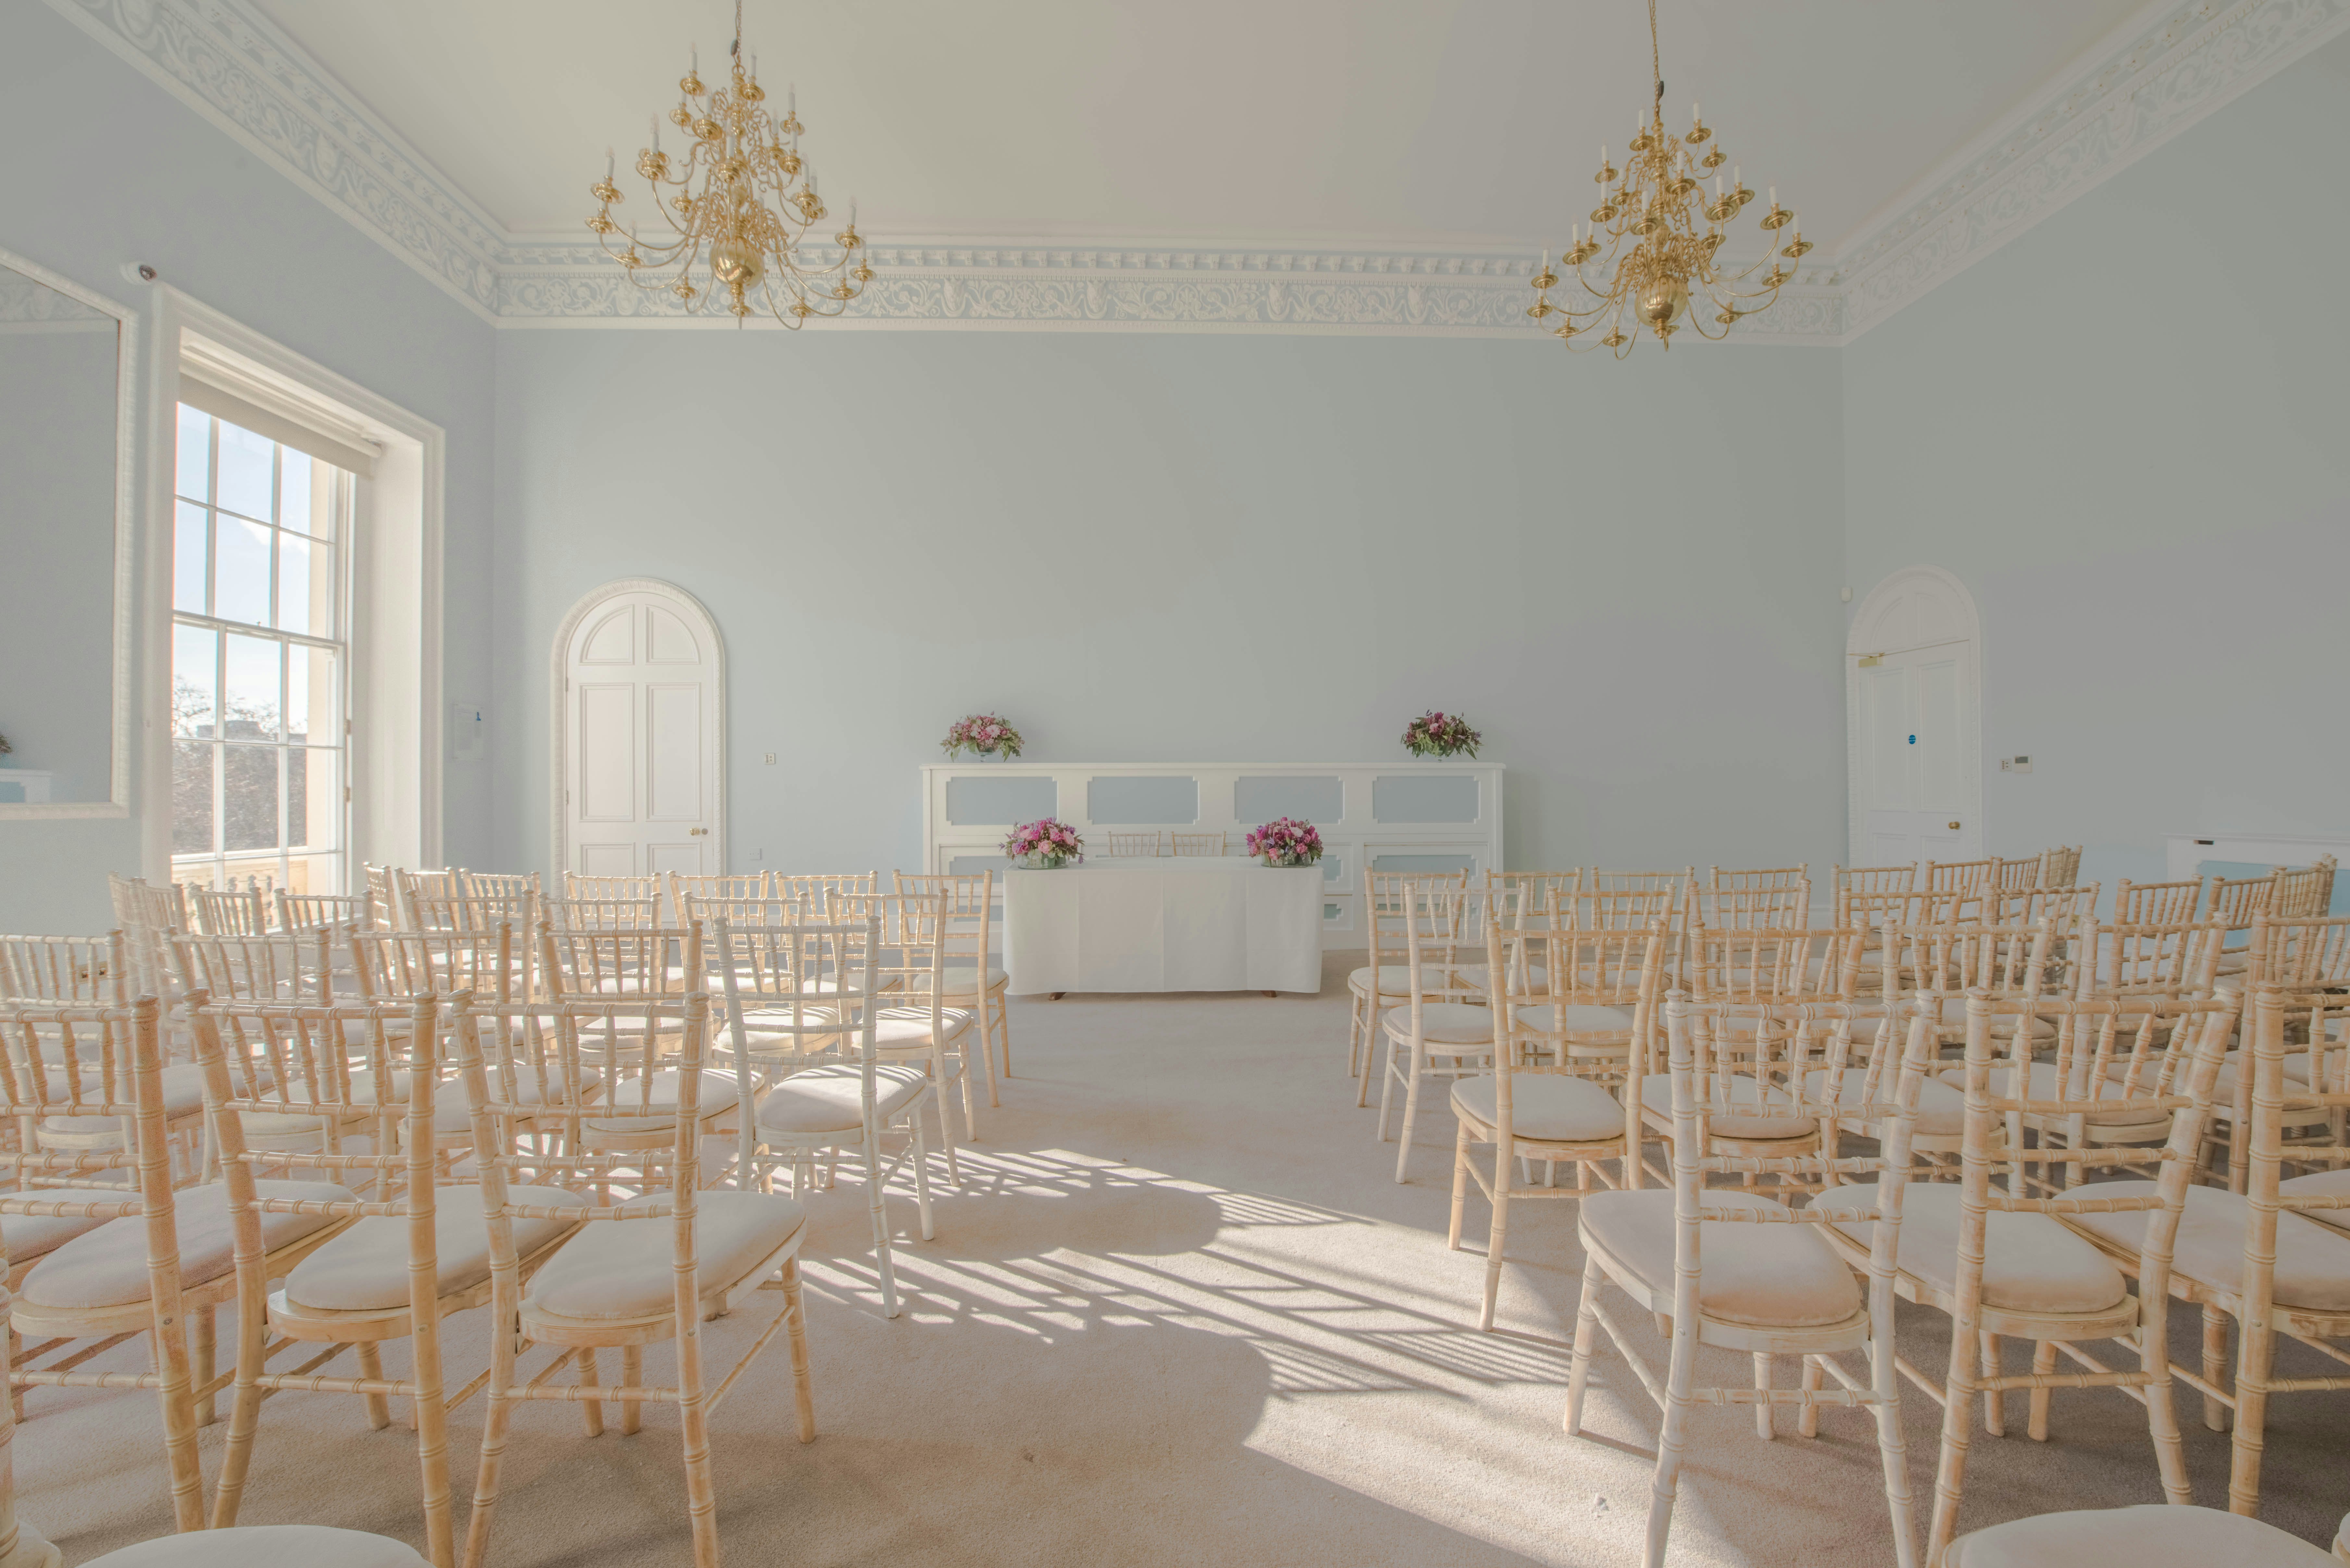 {10-11} Carlton House Terrace - Wolfson Room & Gallery image 3